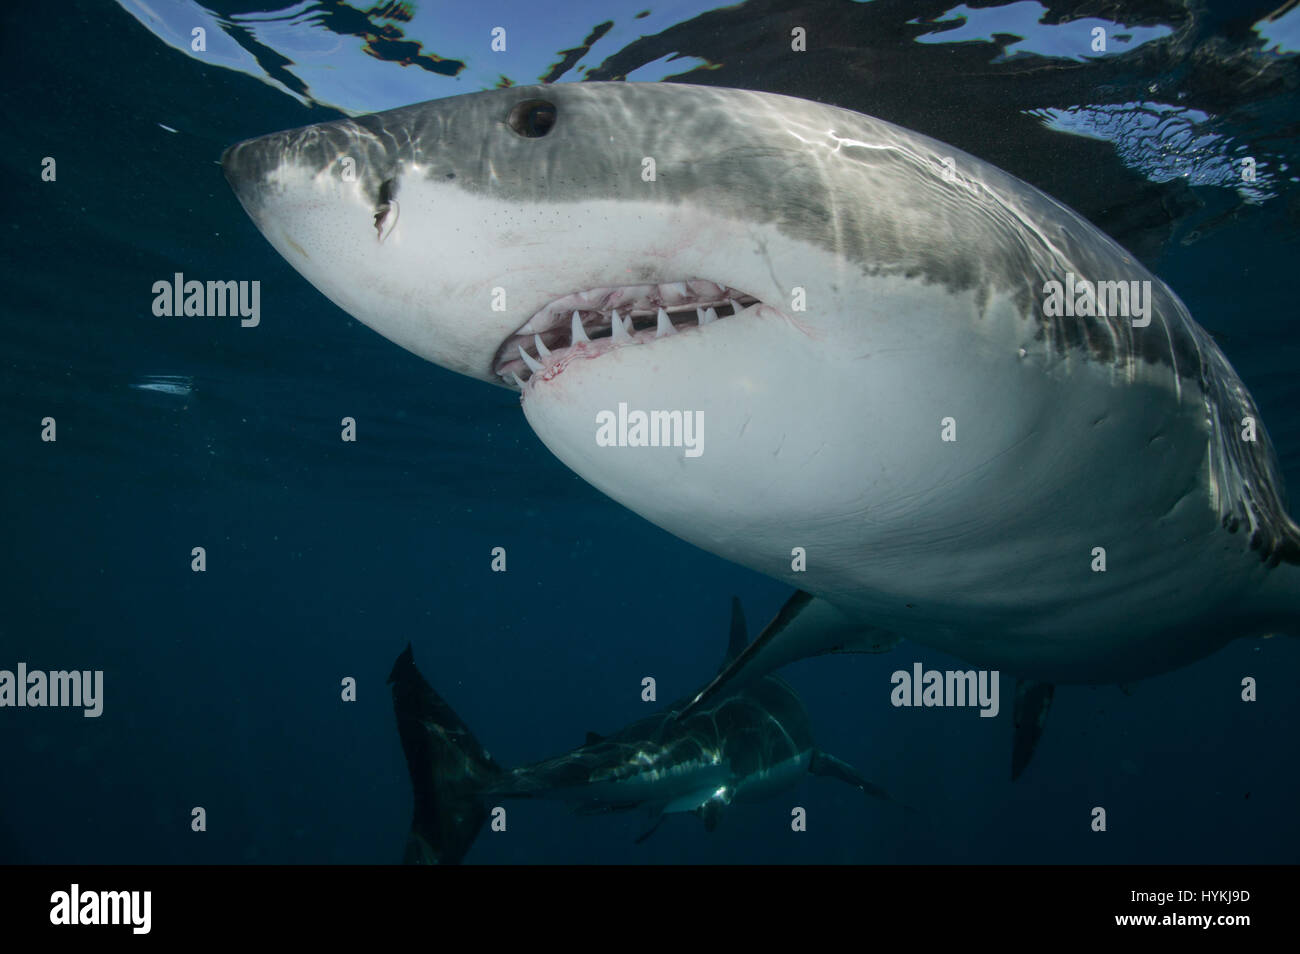 STUNNING pictures have captured what could be the largest great white shark in the world. The huge predator comes face-to-face with two divers in a cage which it makes look miniscule in comparison. While under the circumstances of facing a predator of this size in the wild meant a measurement was not possible, a visual comparison with the official record holder, 20-foot long shark “Deep Blue”, shows that this mighty shark is certainly a contender for the title of world’s biggest shark. Other thrilling shots show great whites coming right for the camera with their large mouths wide open display Stock Photo